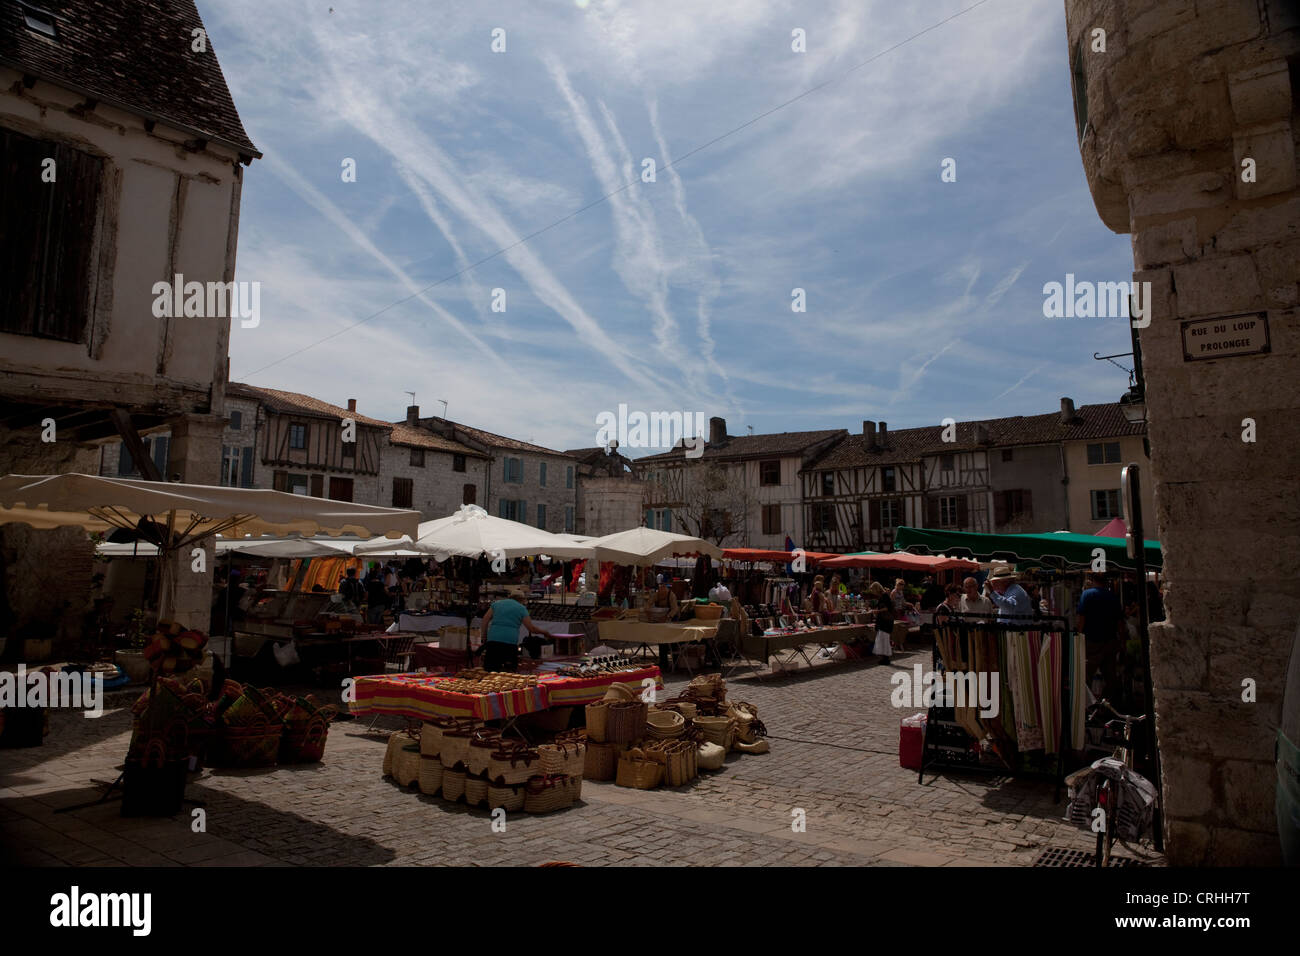 A street market in the medieval village of Eymet Southwest France Stock Photo